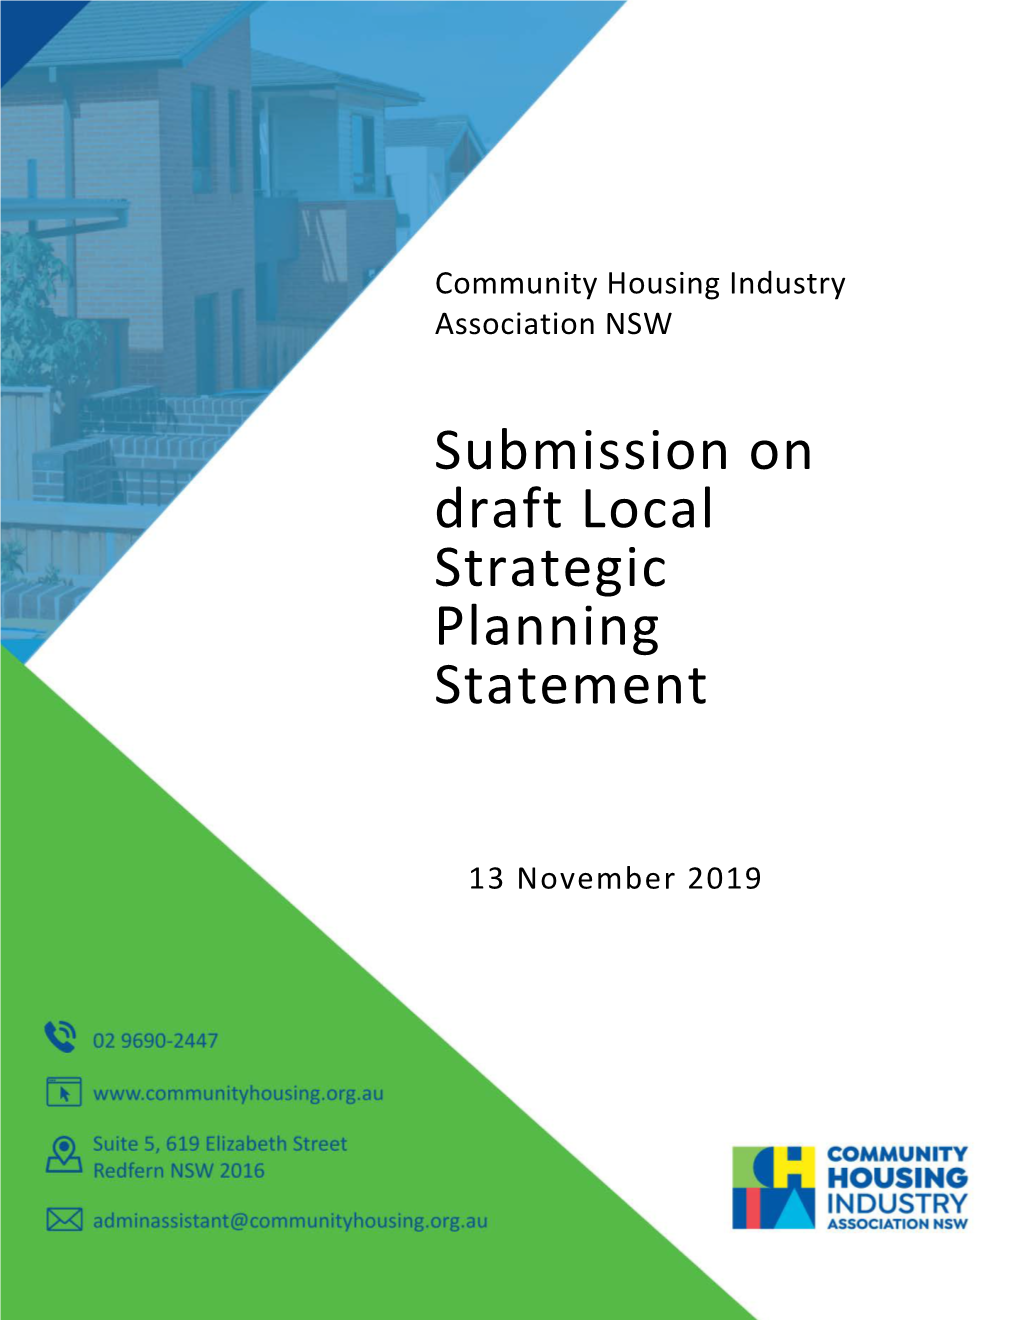 Submission on Draft Local Strategic Planning Statement